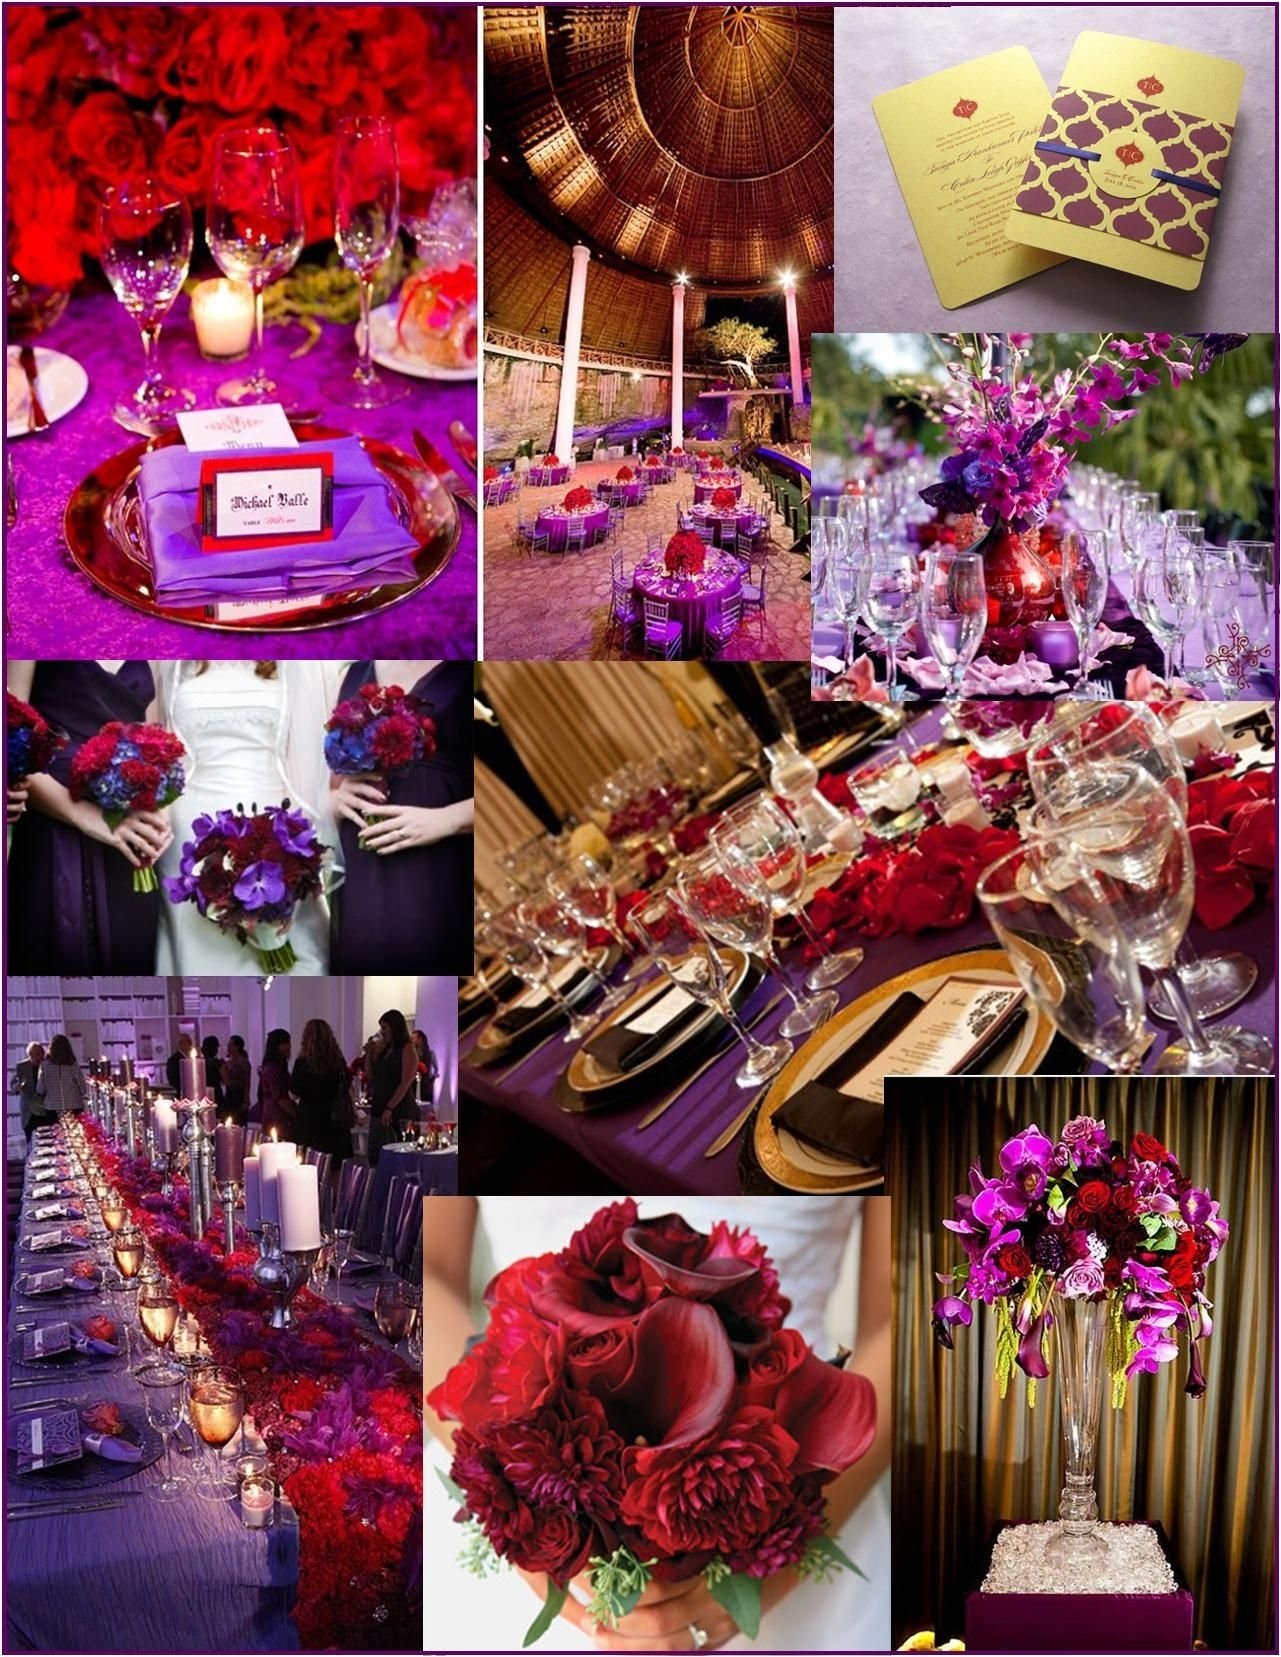 10 Lovely Red And Purple Wedding Ideas purpleredwedding red wedding ideas pretty peacock paperie 1 2022